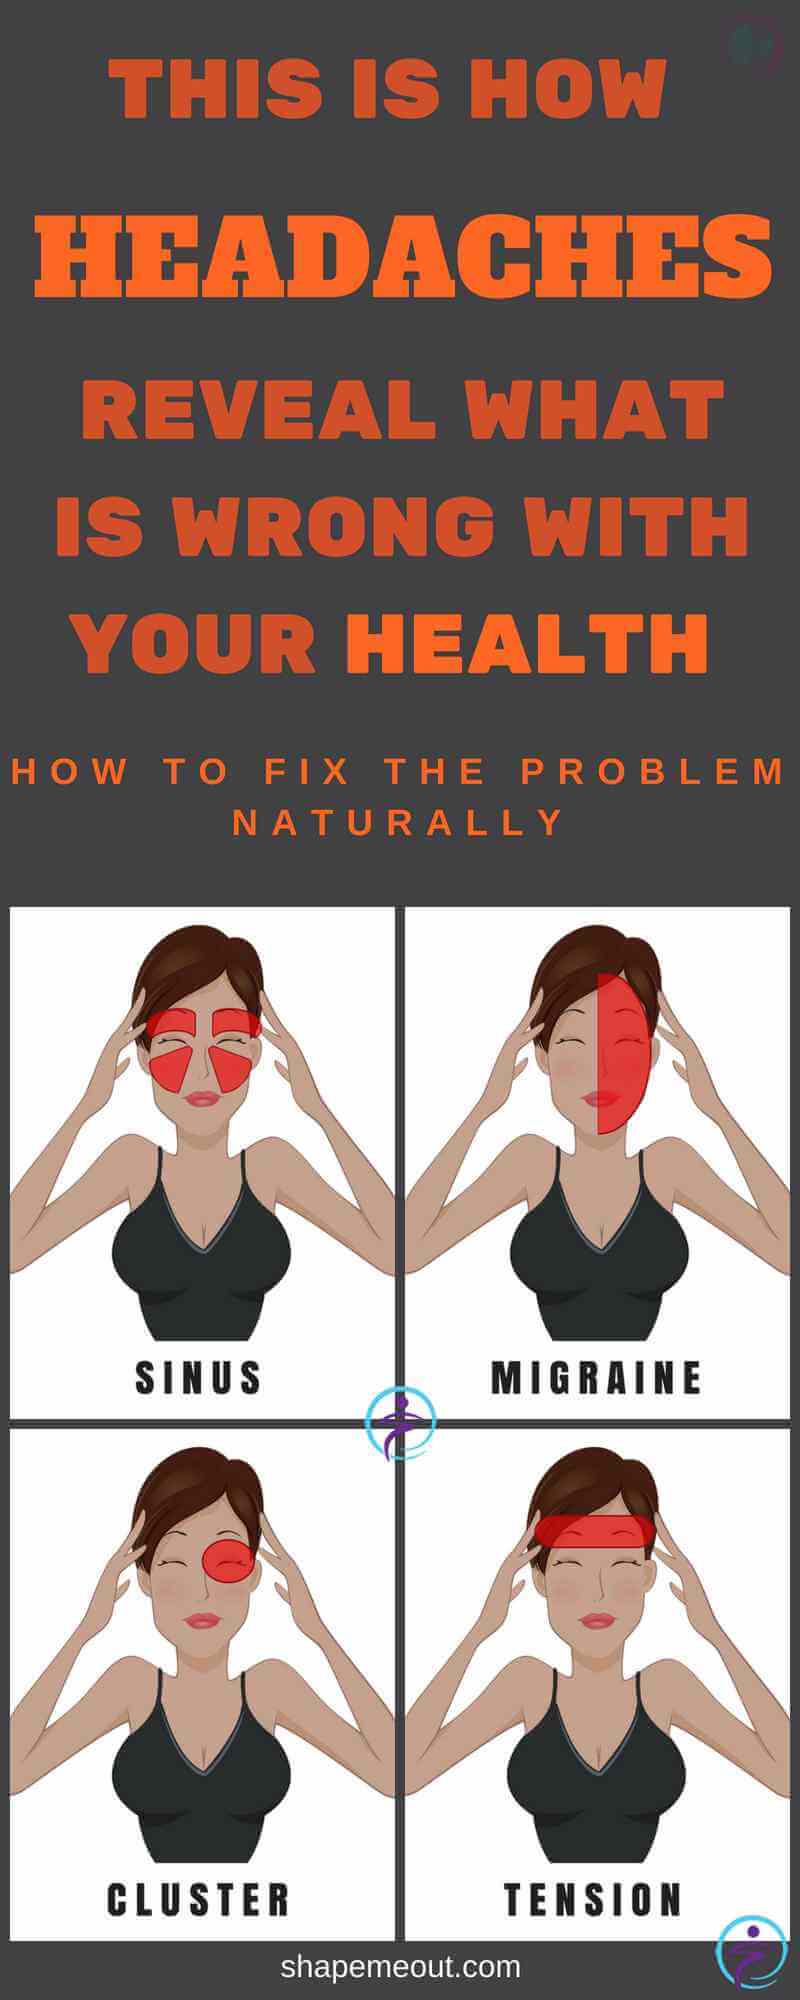 This is How Headaches Reveal What is Wrong With Your Health And How To Fix The Problem Naturally